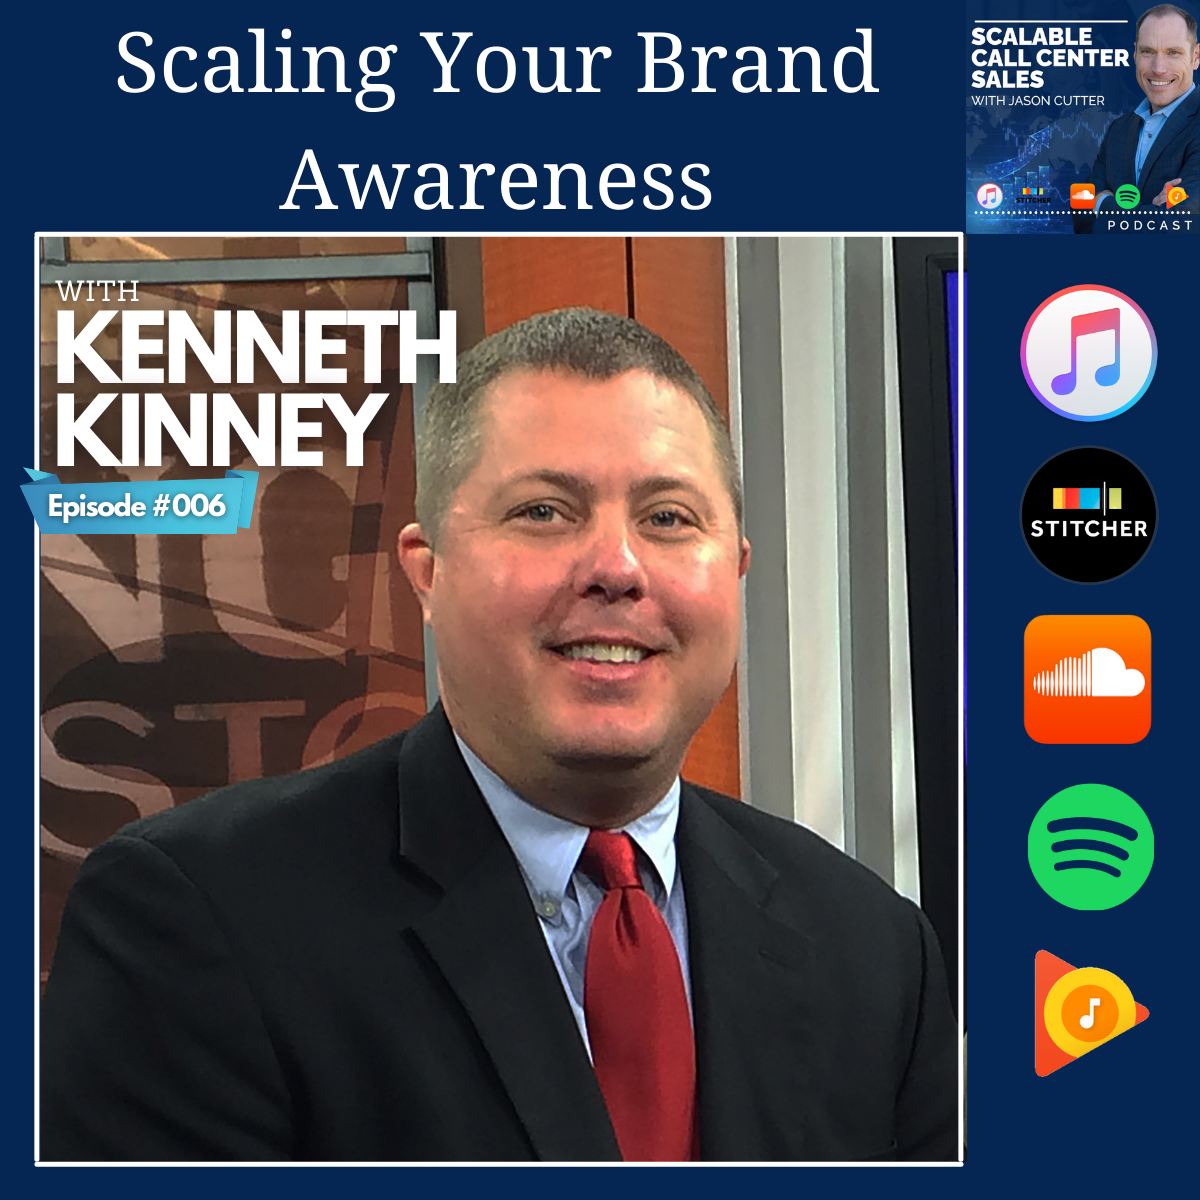 [006] Scaling Your Brand Awareness, with Kenneth "Shark" Kinney